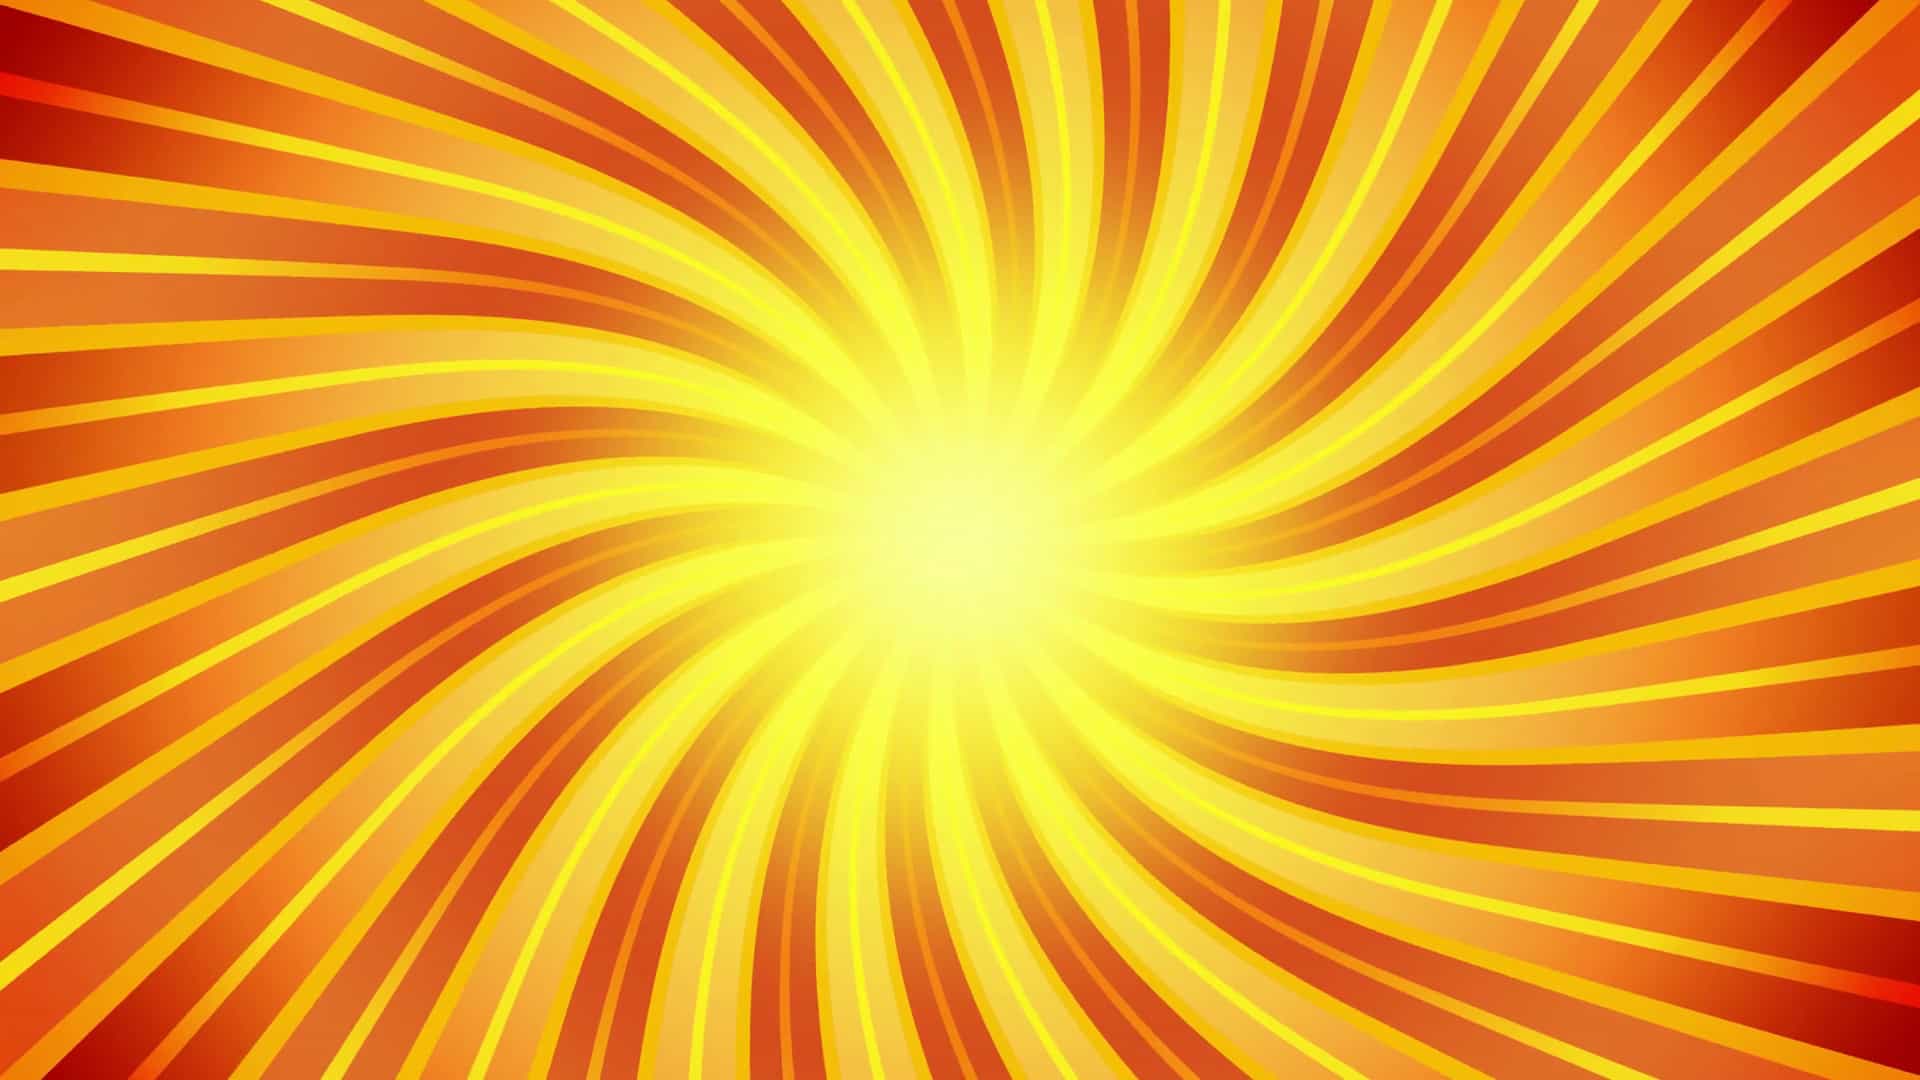 A red and yellow abstract spiral sunburst pattern.